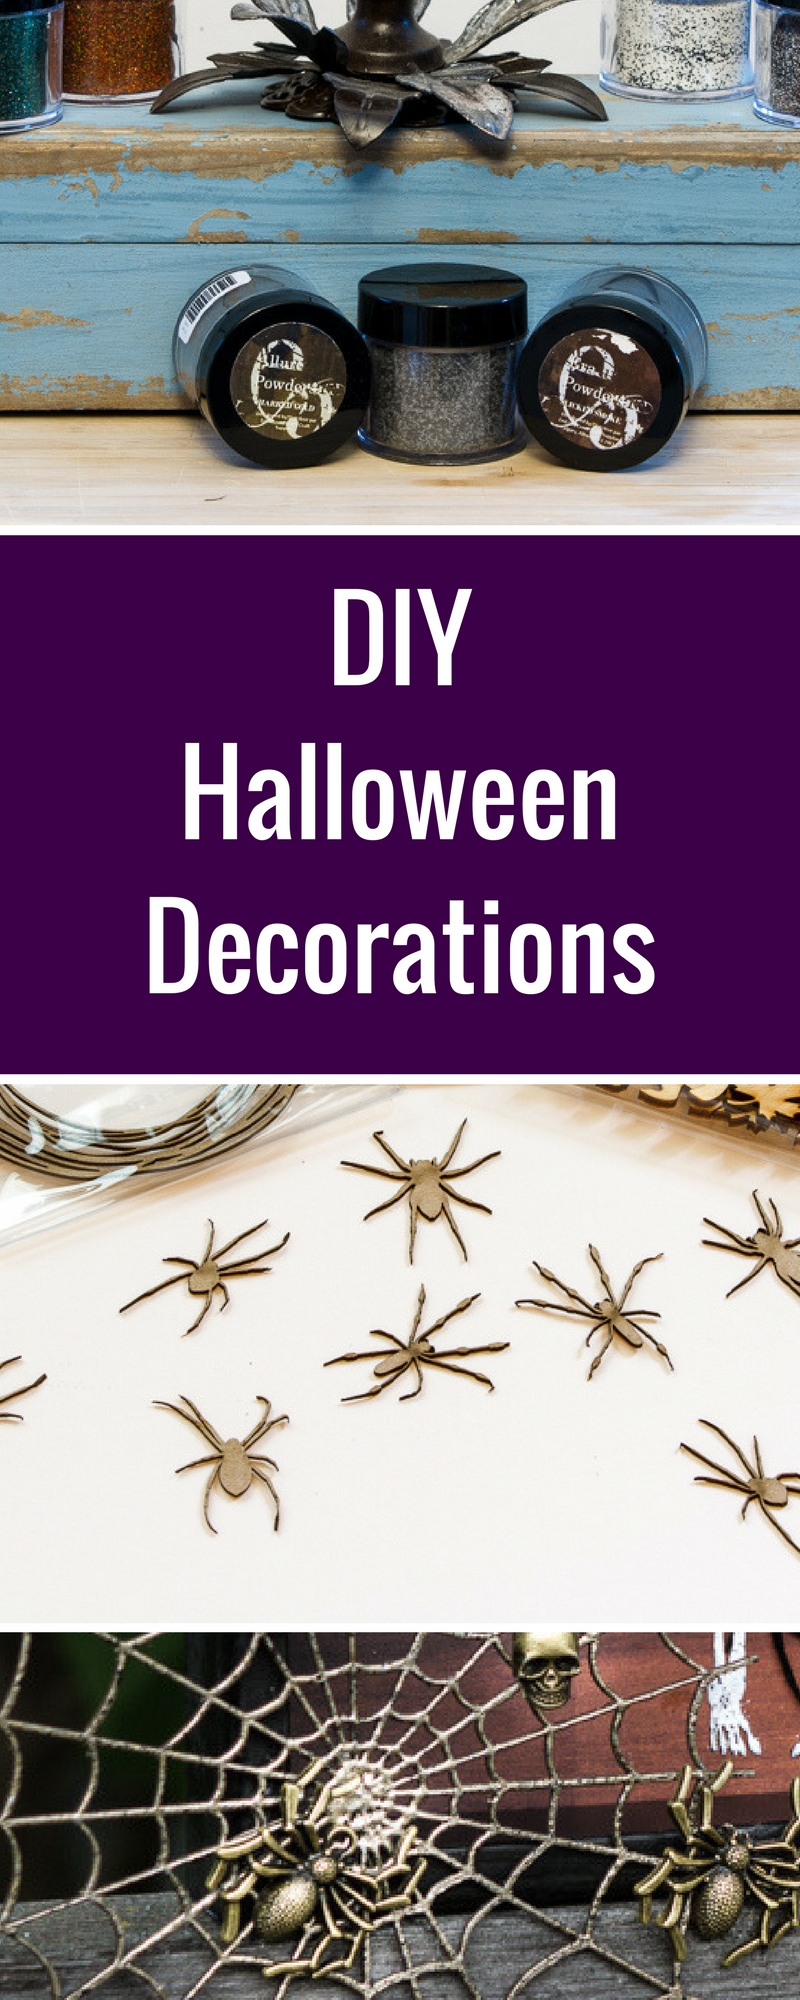 Halloween Home Decor | Scrapbooking Halloween | Featuring Emerald Creek Craft Supplies and Southern Ridge Trading Co. | Designed by Kim Gowdy | Creative Scrapbooker Magazine #Halloween #scrapbooking #homedecor